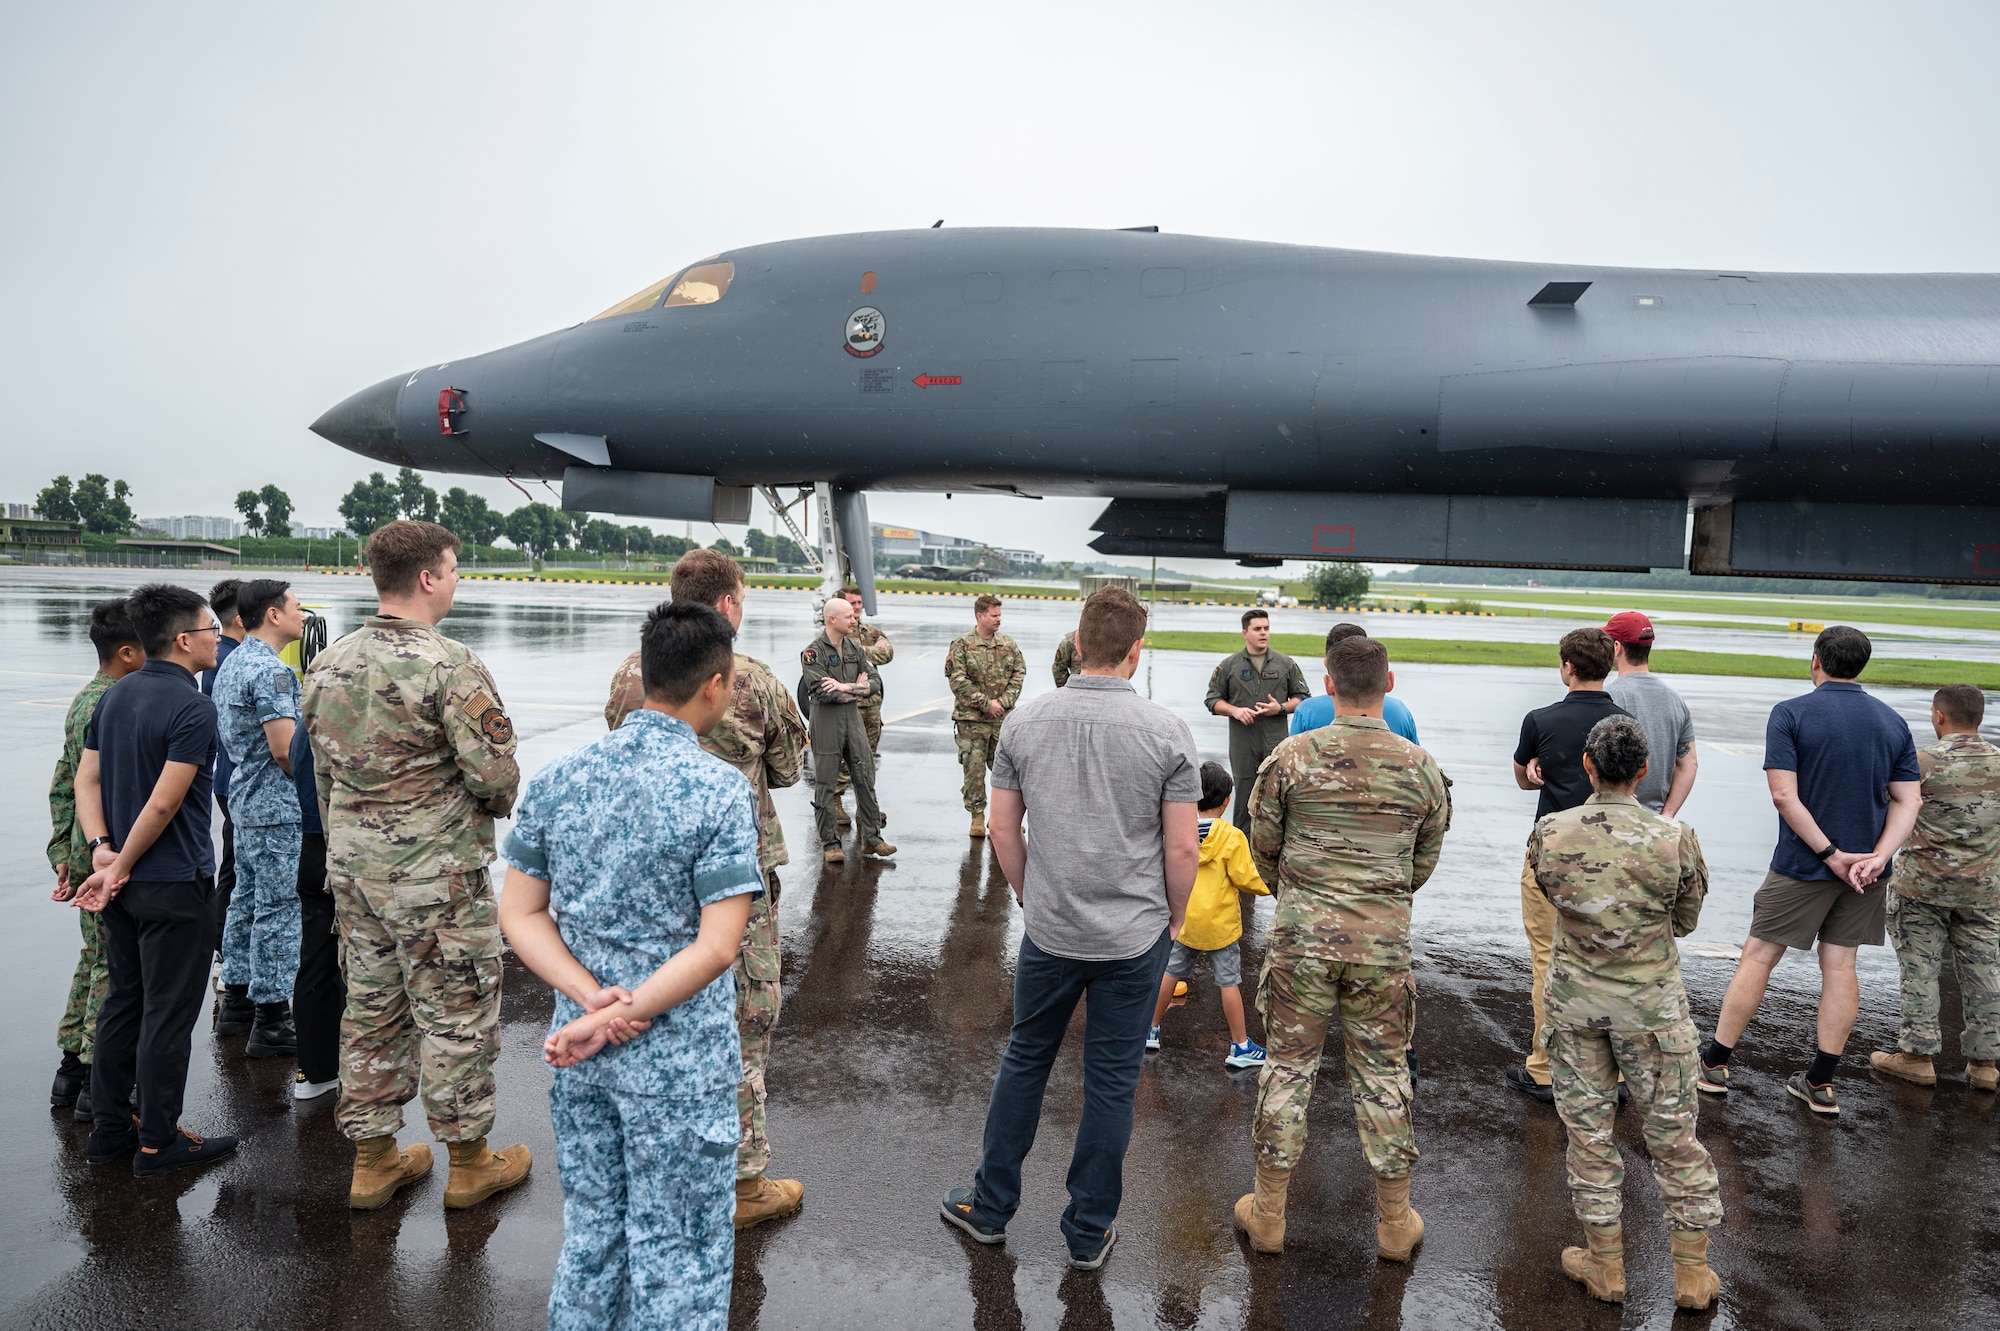 U.S. Air Force members from the 345th Expeditionary Bomb Squadron, out of Dyess Air Force Base, Texas, give a B-1B Lancer tour at Paya Lebar Air Base, Singapore, Jan. 20, 2024. The U.S. Air Force’s partnership with the Republic of Singapore Air Force provides valuable professional exchanges and training opportunities with different aircraft and aircrews. (U.S. Air Force Photo by Senior Airman Ryan Hayman)